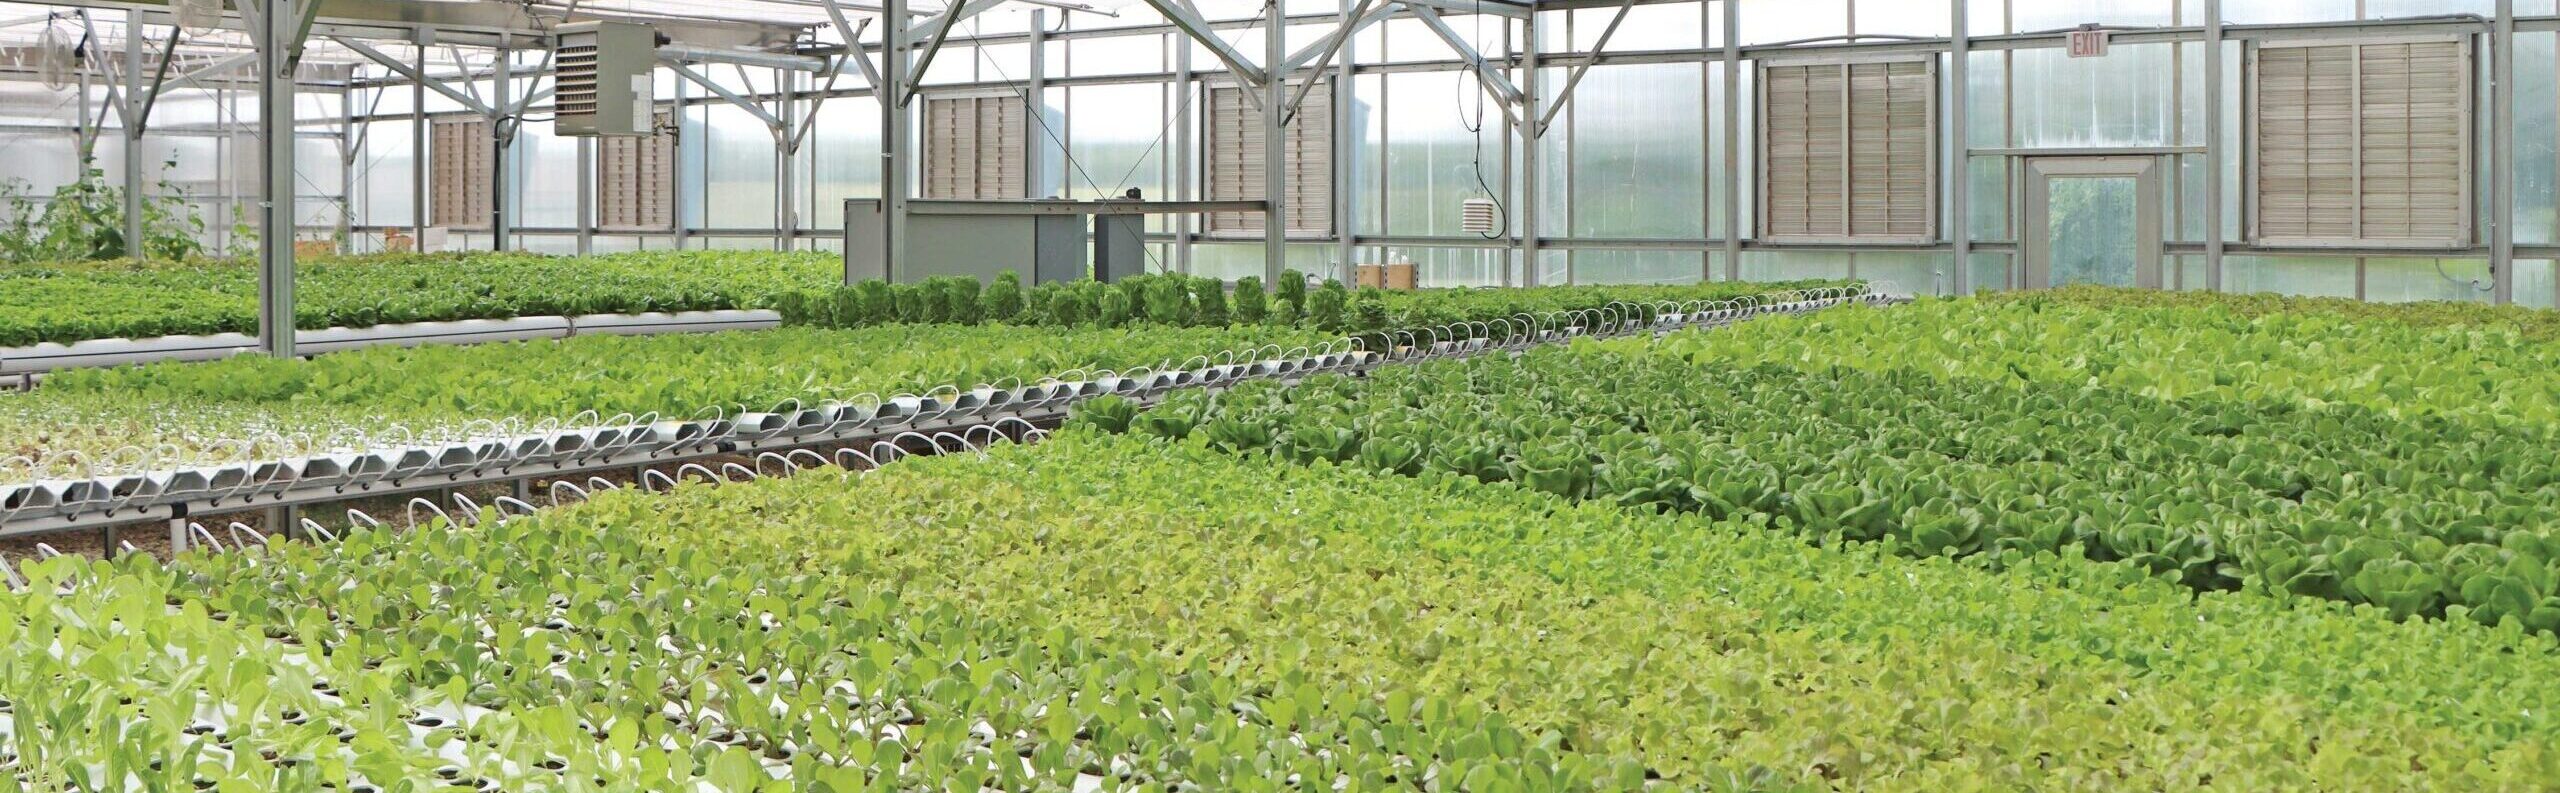 rows of NFT systems growing lettuce inside greenhouse